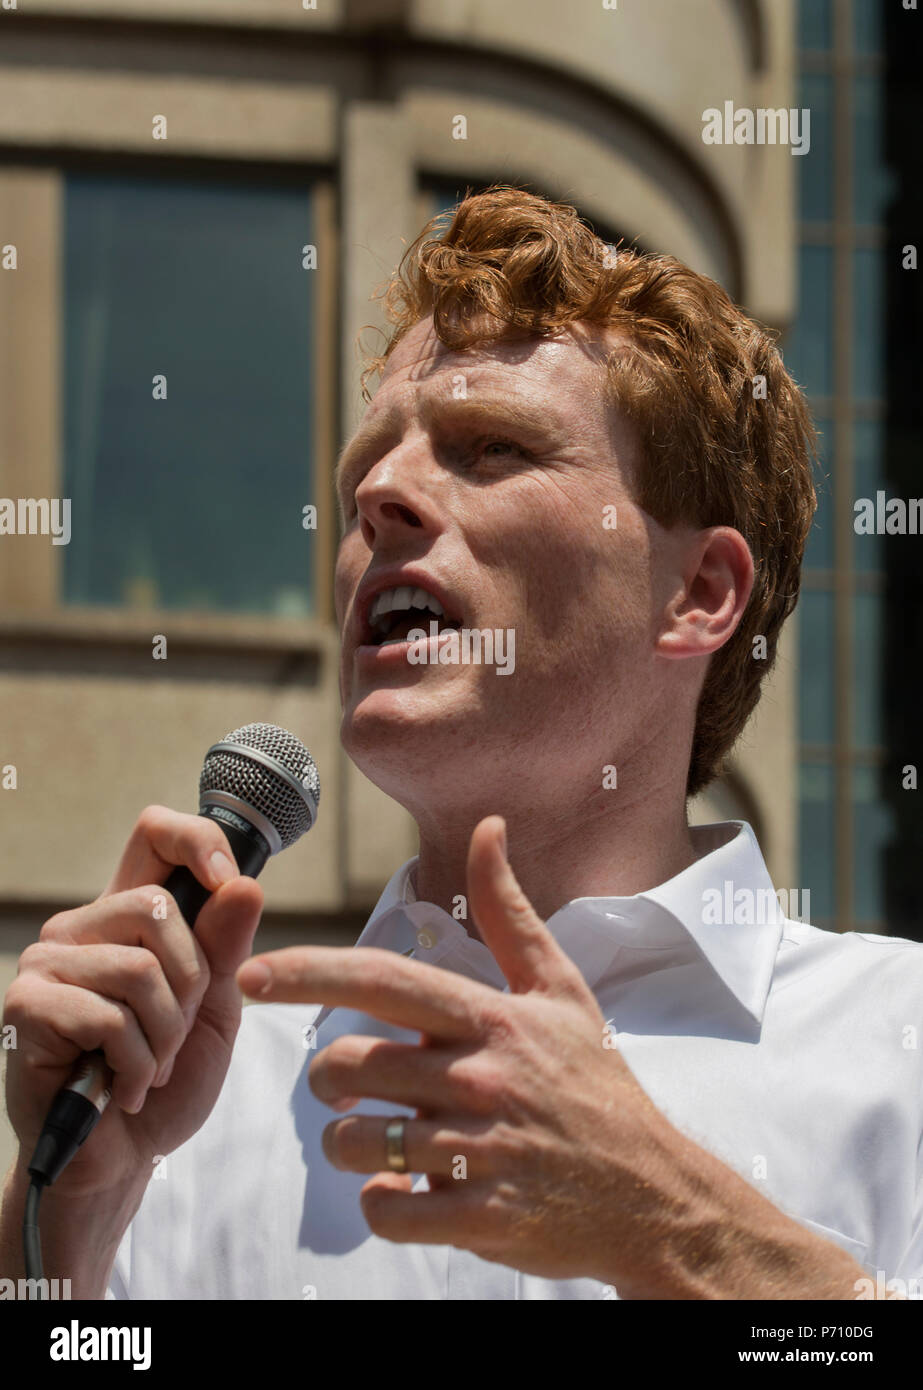 U.S. Democratic Representative Joseph Patrick Kennedy III (Joe Kennedy), grandson of Robert Kennedy and grand-nephew of John F. Kennedy Speaking during the Rally against Family Separation in Boston, MA. Kennedy had spoken against U.S. President Donald Trump’s policy of detaining immigrants and separating immigrant families.  Large rallies against U.S. President Trump’s policy of separating immigrant families took place in more than 750 U.S. cities on June 30th of 2018. Stock Photo